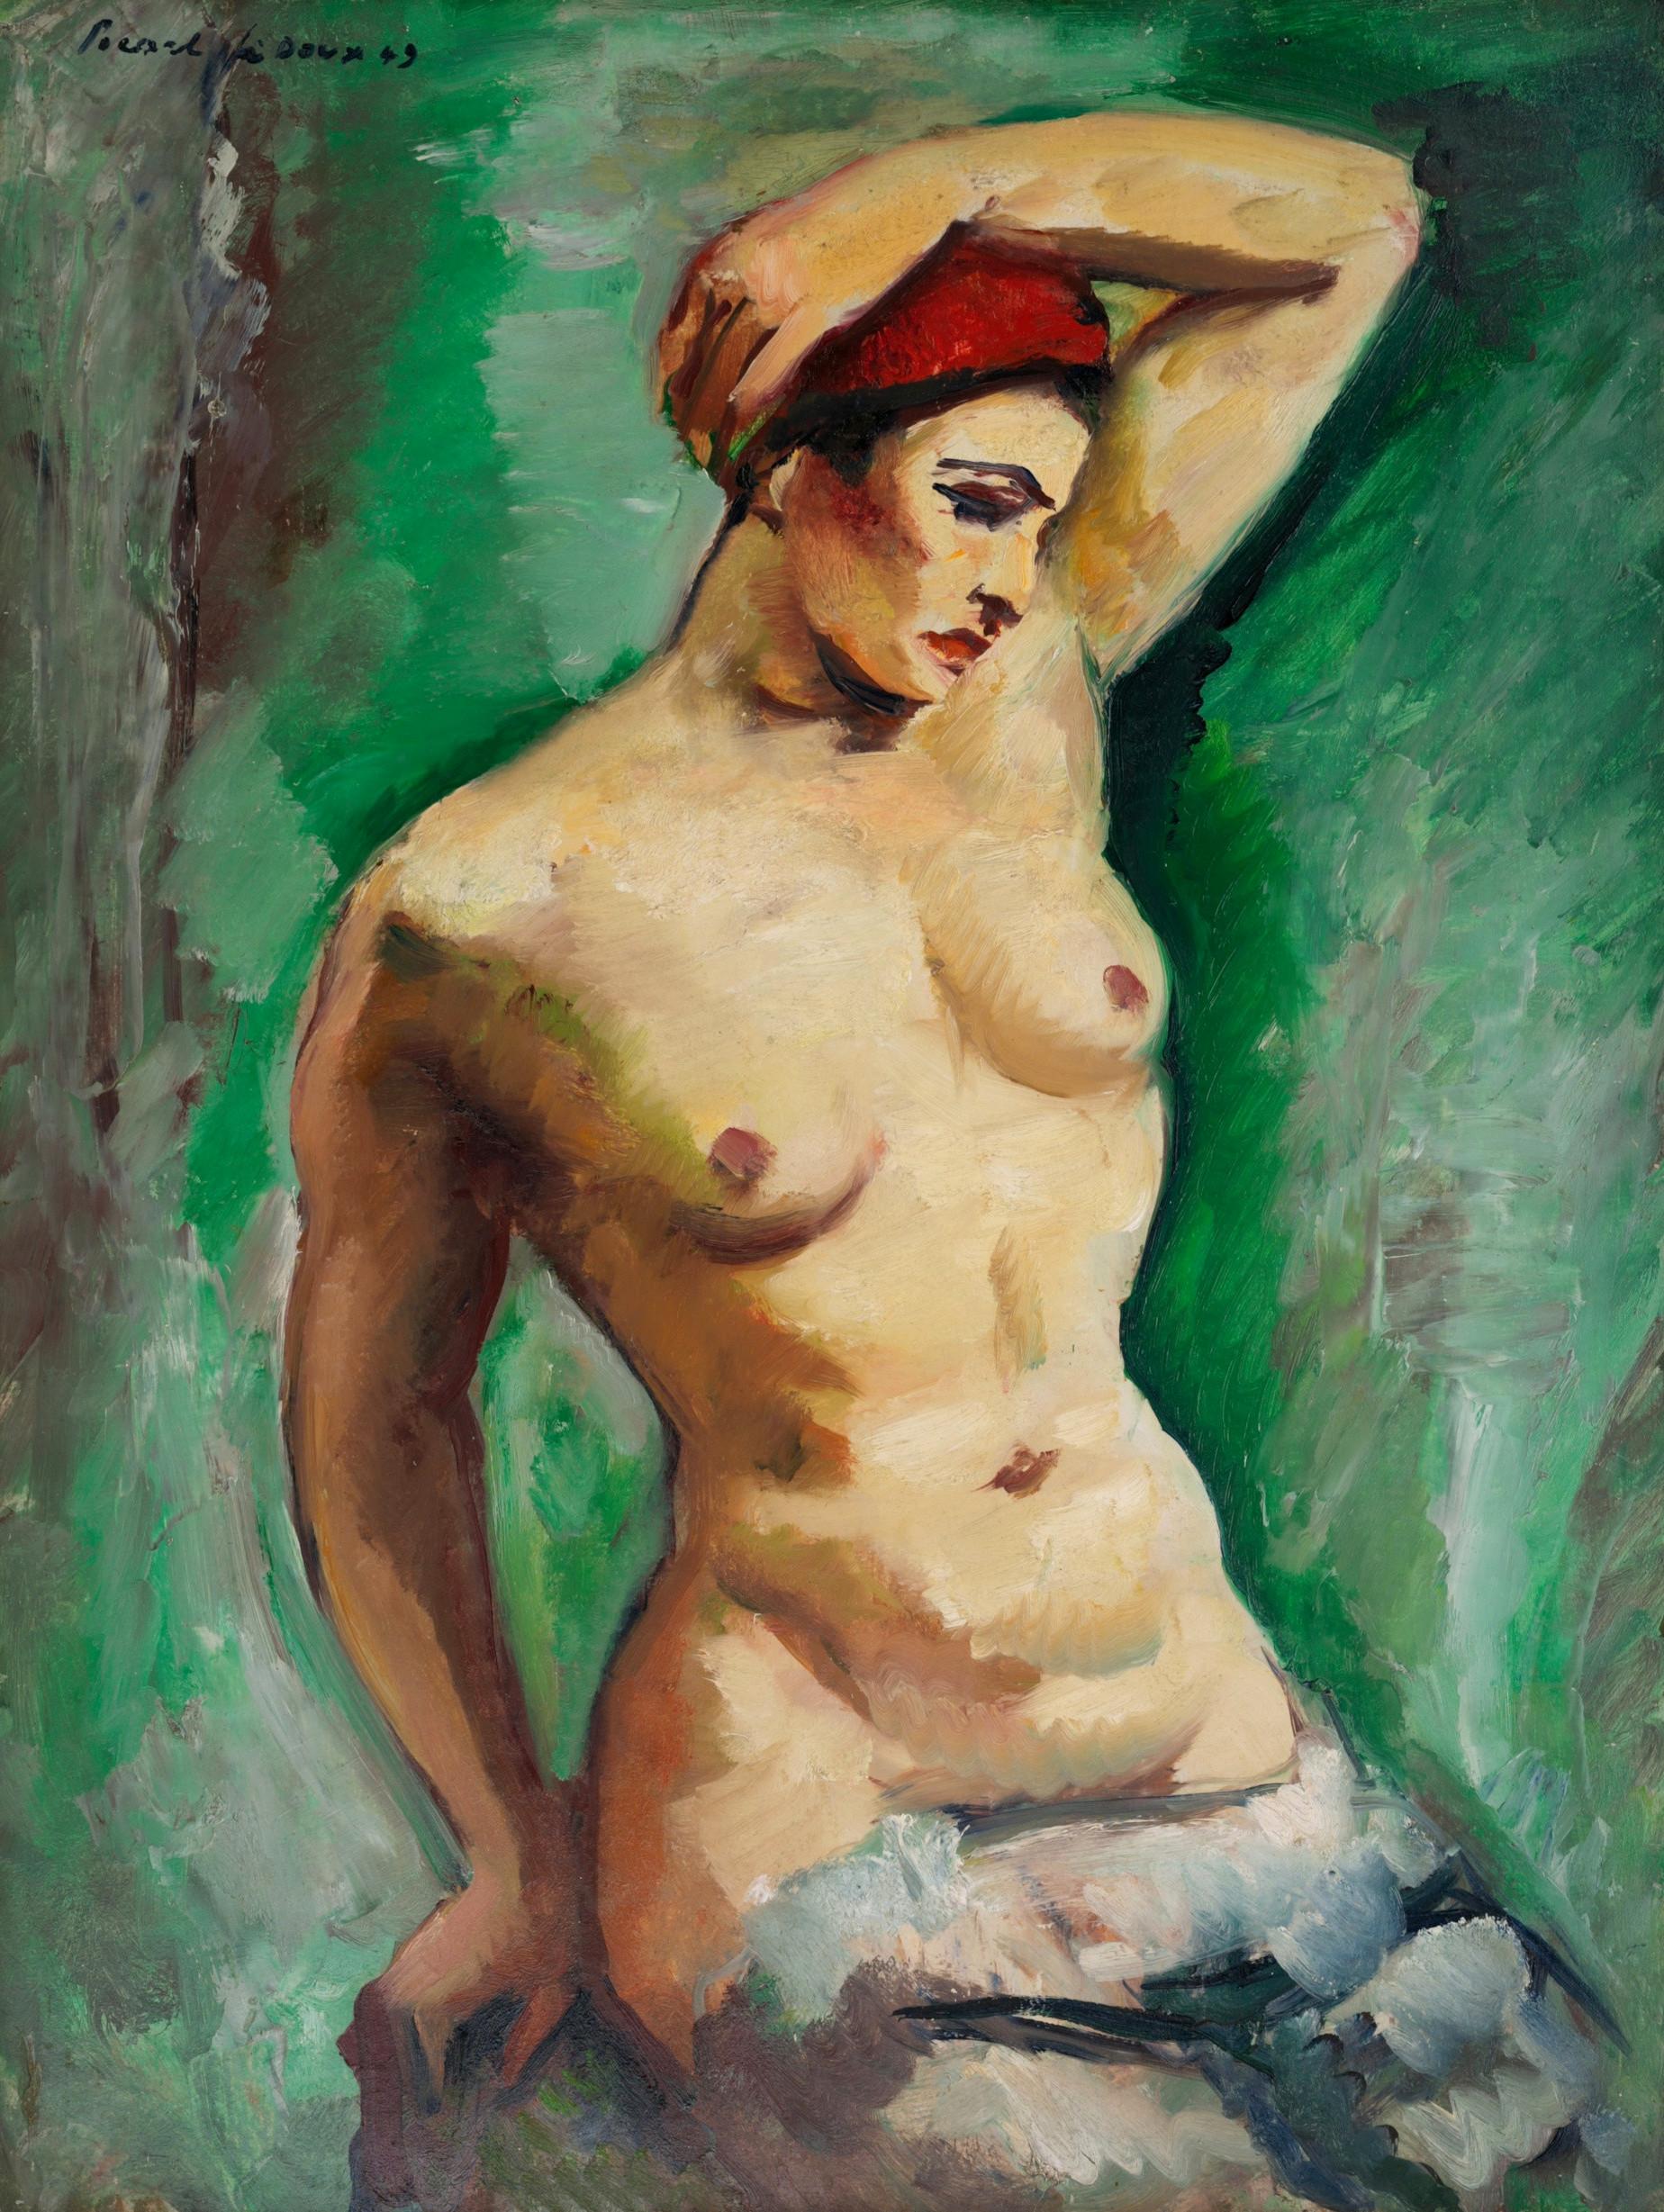 Charles PICART LE DOUX, Model on Green Background, Oil on Isorel, 1949 - Painting by Charles Picart le Doux